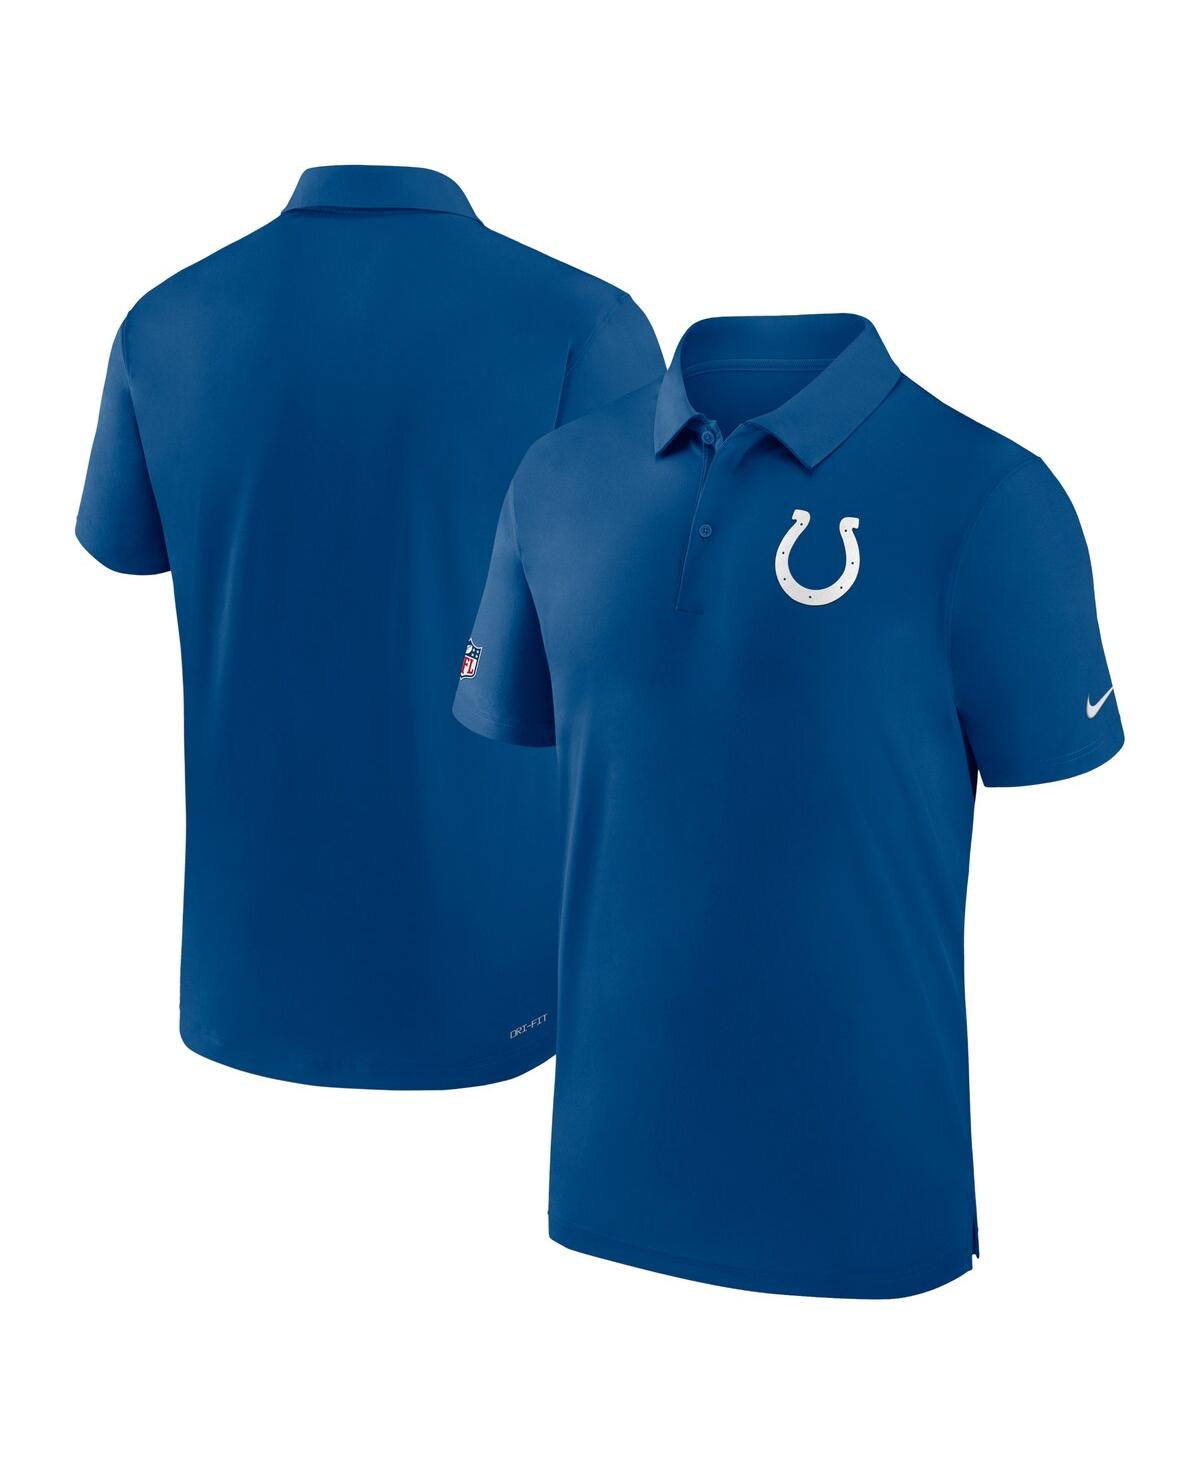 Nike Men's  Royal Indianapolis Colts Sideline Victory Performance Polo Shirt